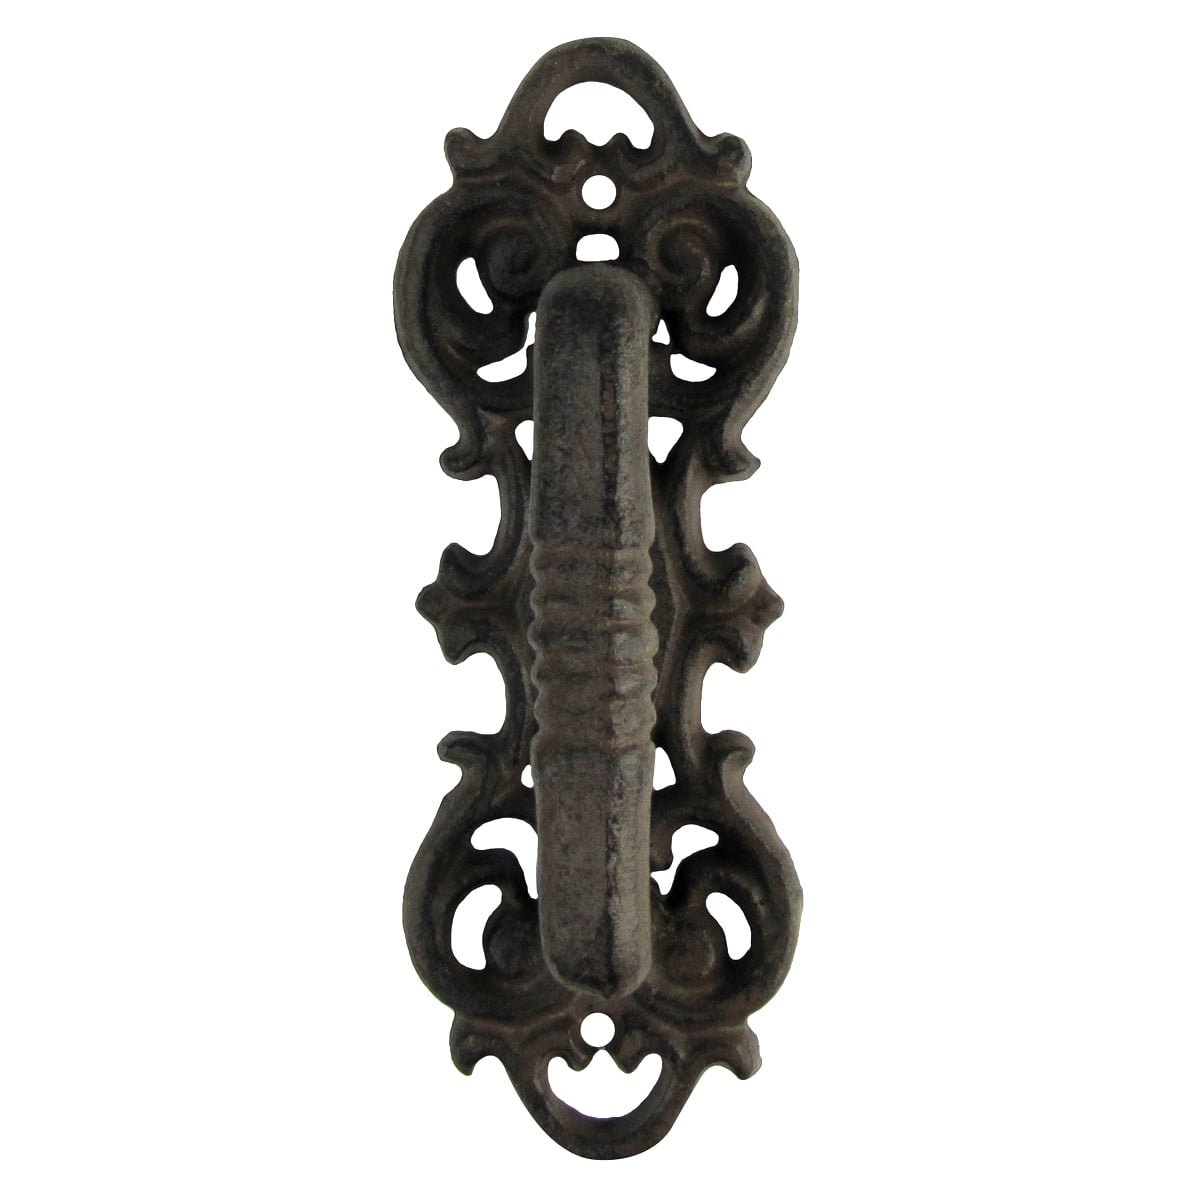 Cast Iron Rustic Gate Pull Barn Door Handle Primitive Style Garden Shed Hardware 